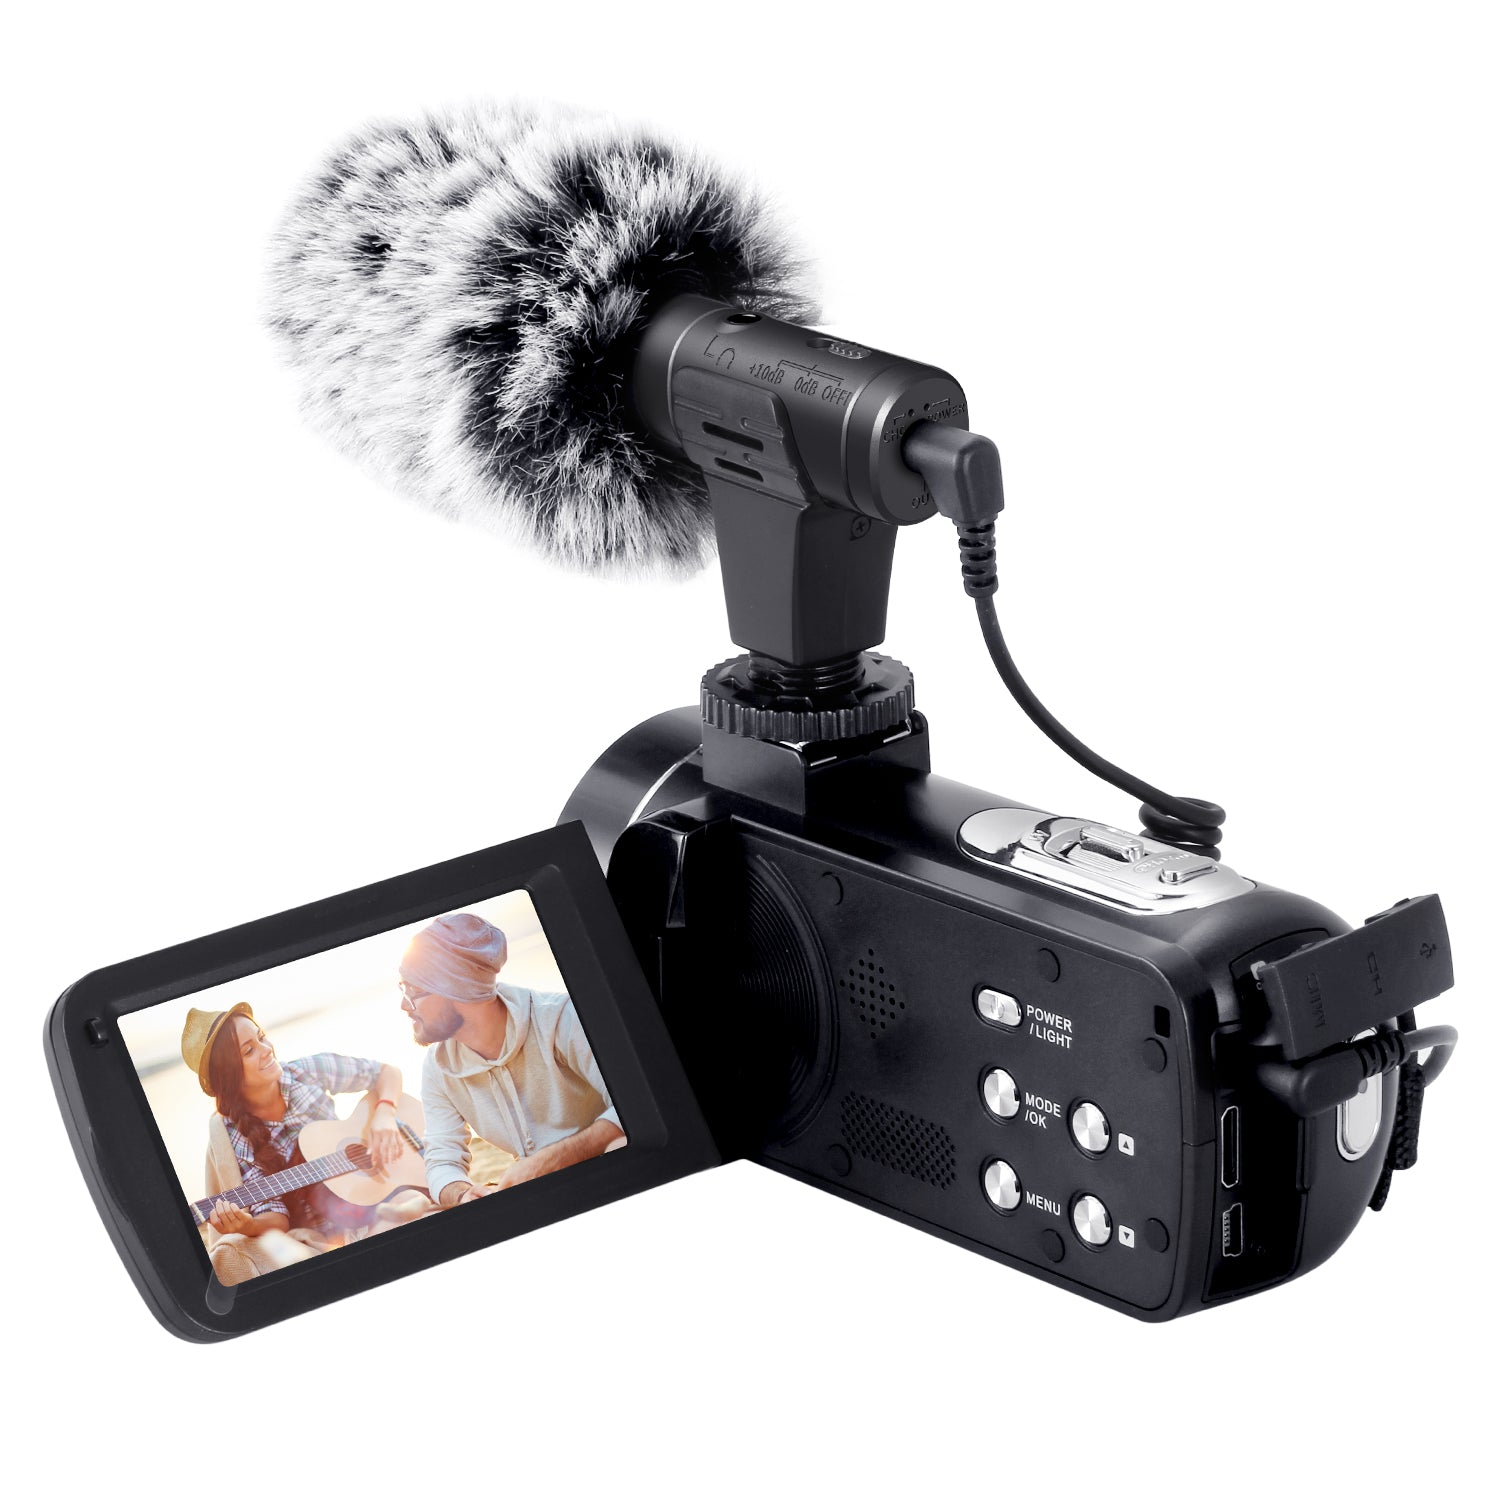 MAMEN MIC-07 Photography Rcondenser Audio Recording Microphone for Phone and Camera